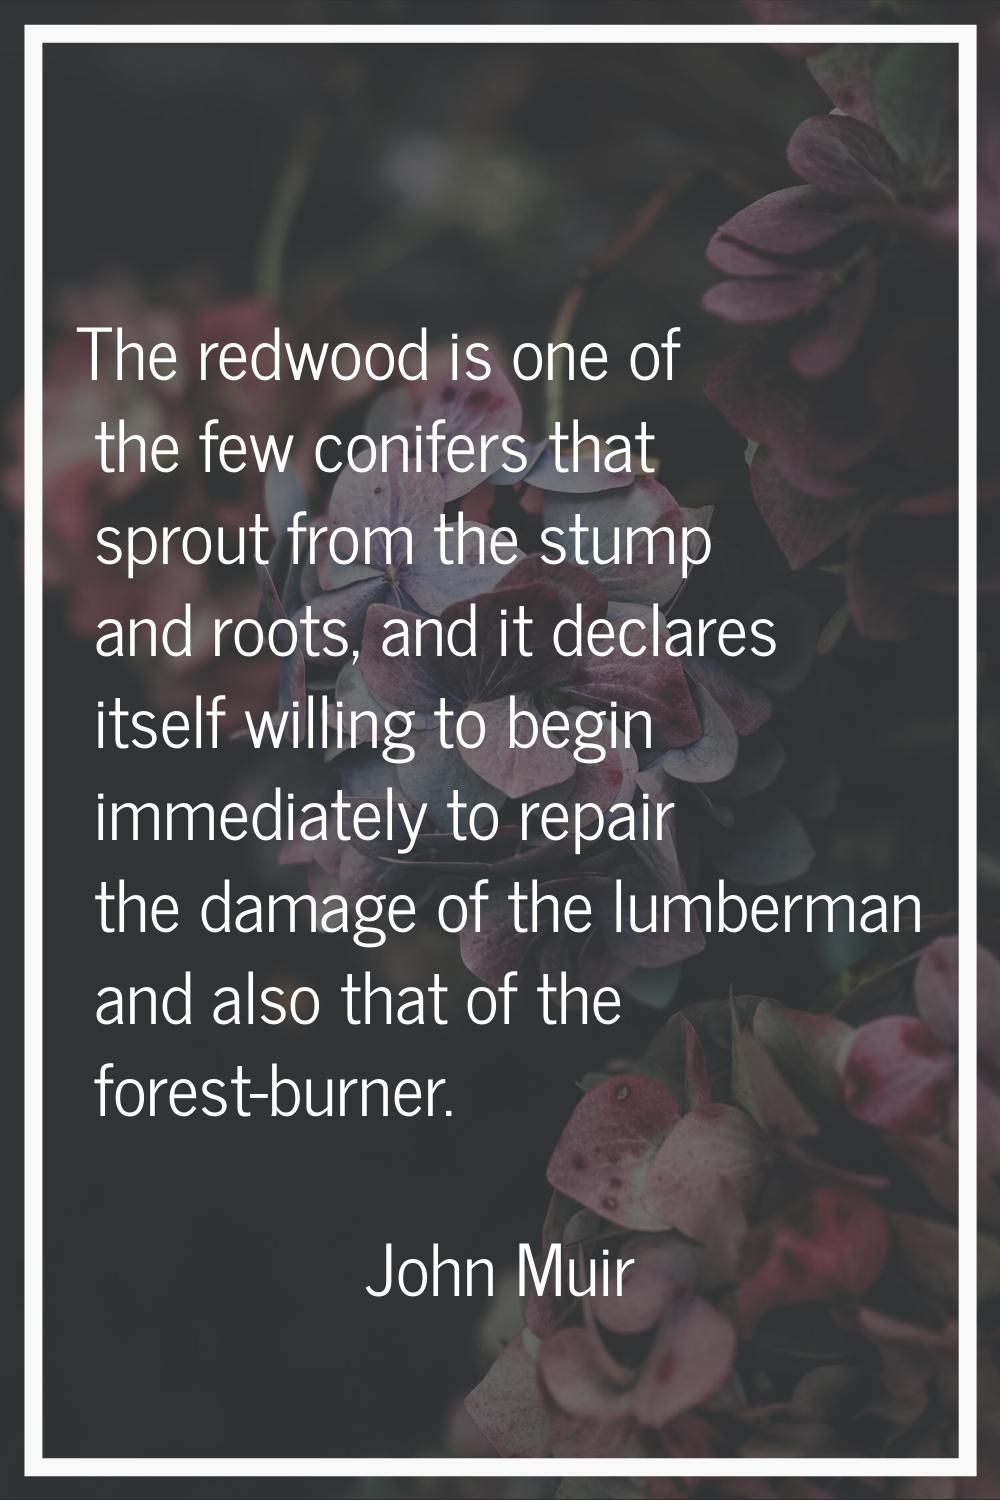 The redwood is one of the few conifers that sprout from the stump and roots, and it declares itself